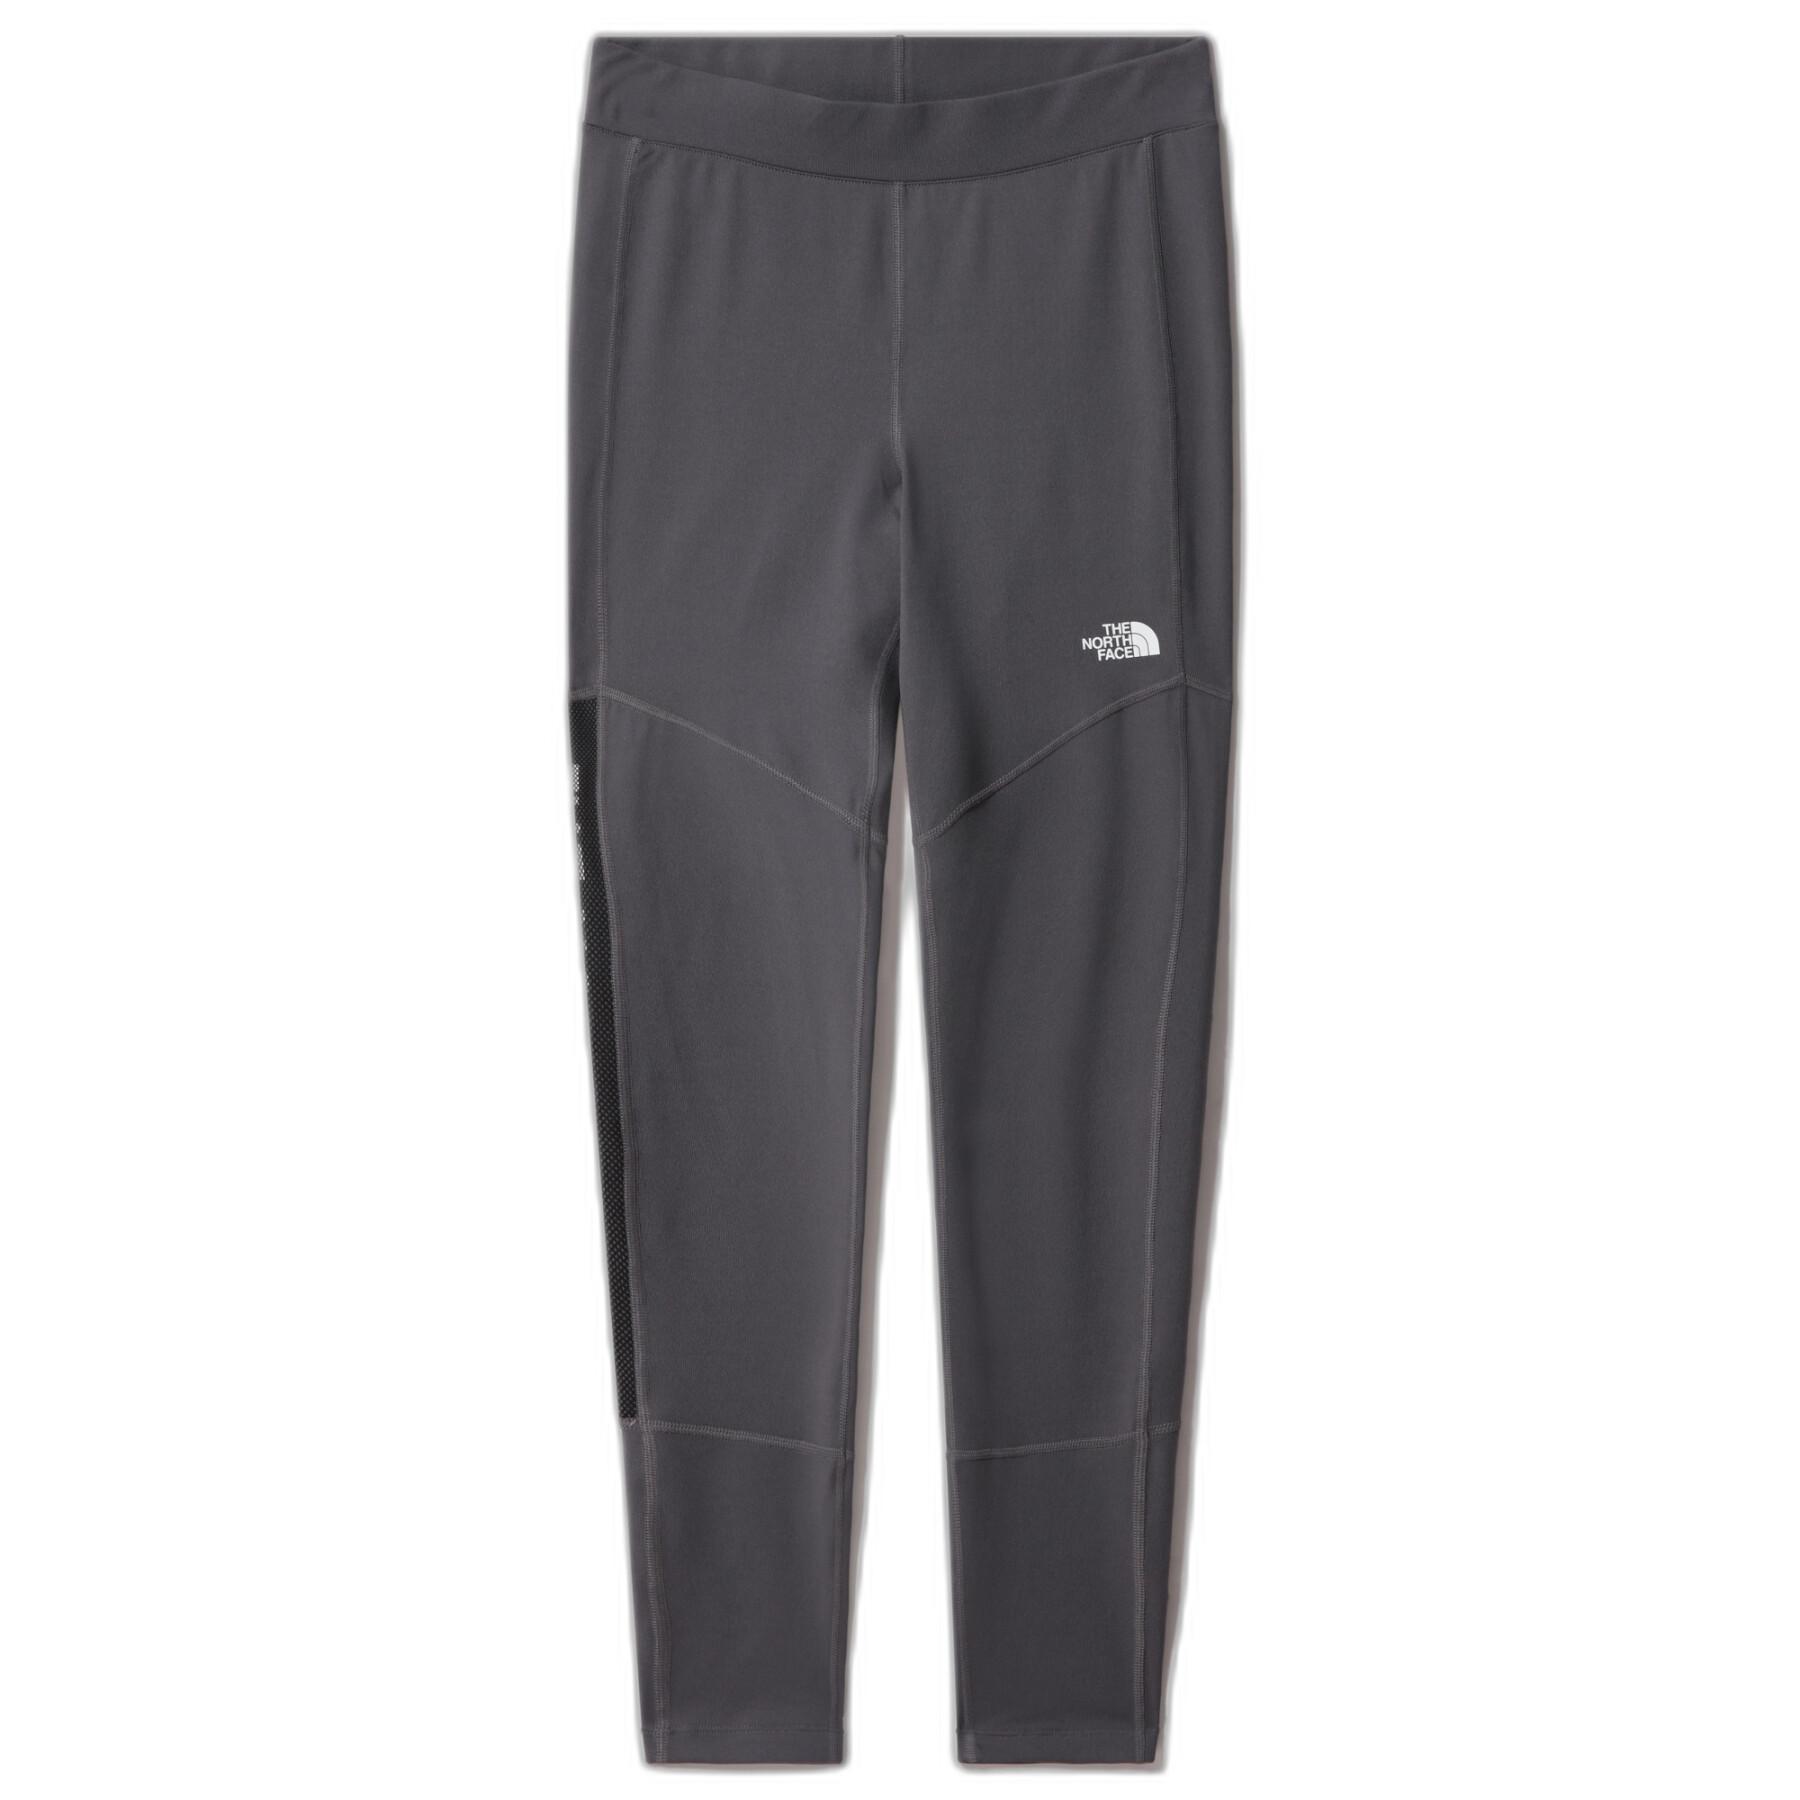 Tights The North Face femme Tight